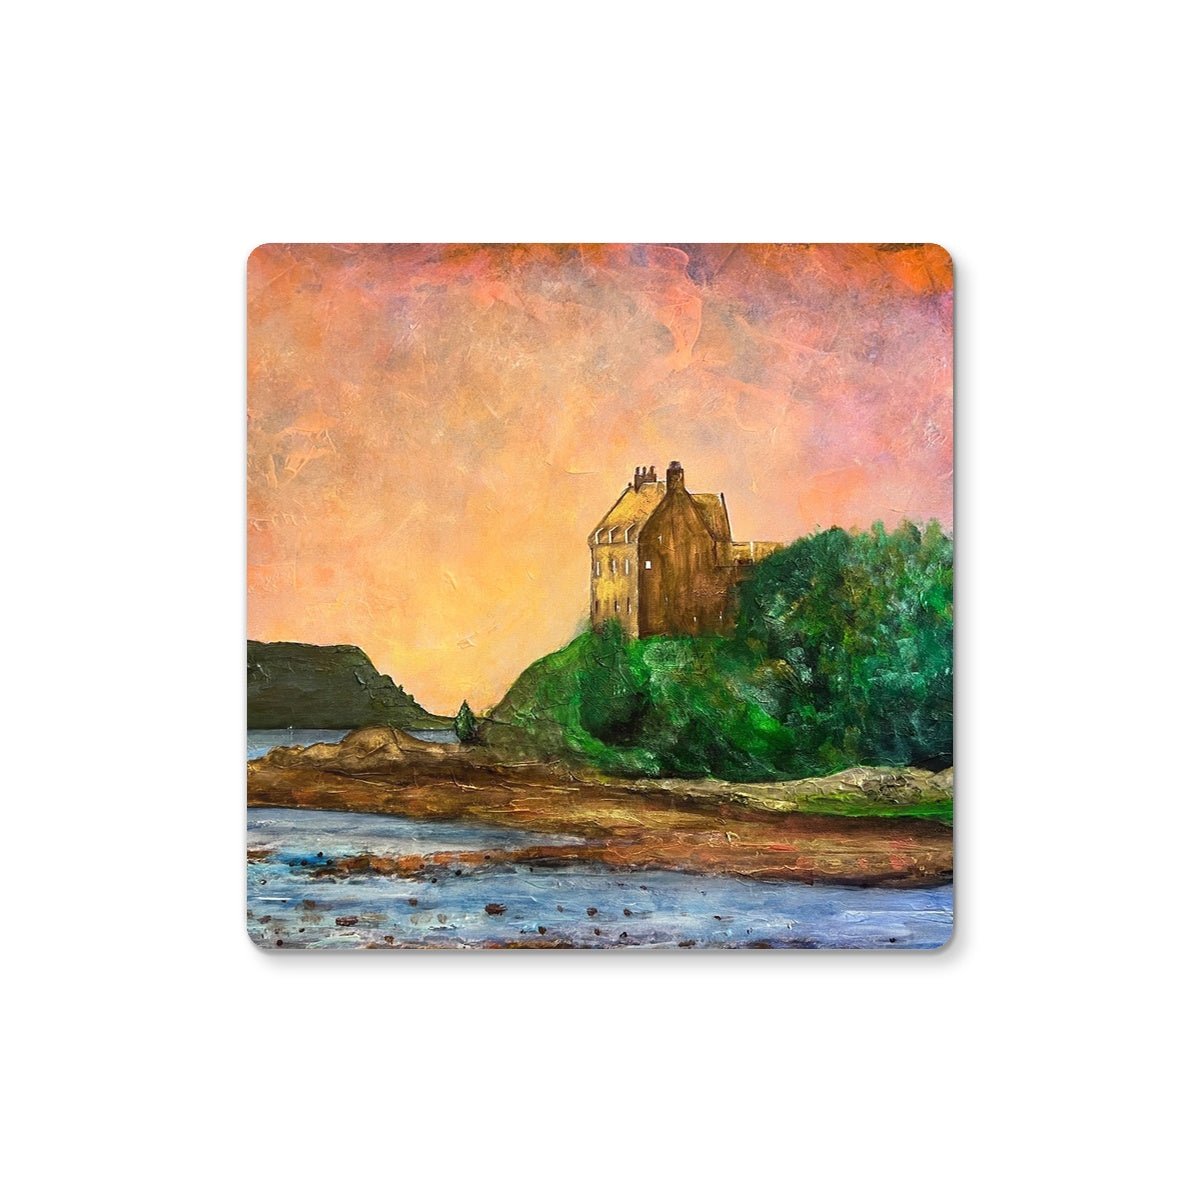 Duntrune Castle Art Gifts Coaster-Coasters-Scottish Castles Art Gallery-6 Coasters-Paintings, Prints, Homeware, Art Gifts From Scotland By Scottish Artist Kevin Hunter